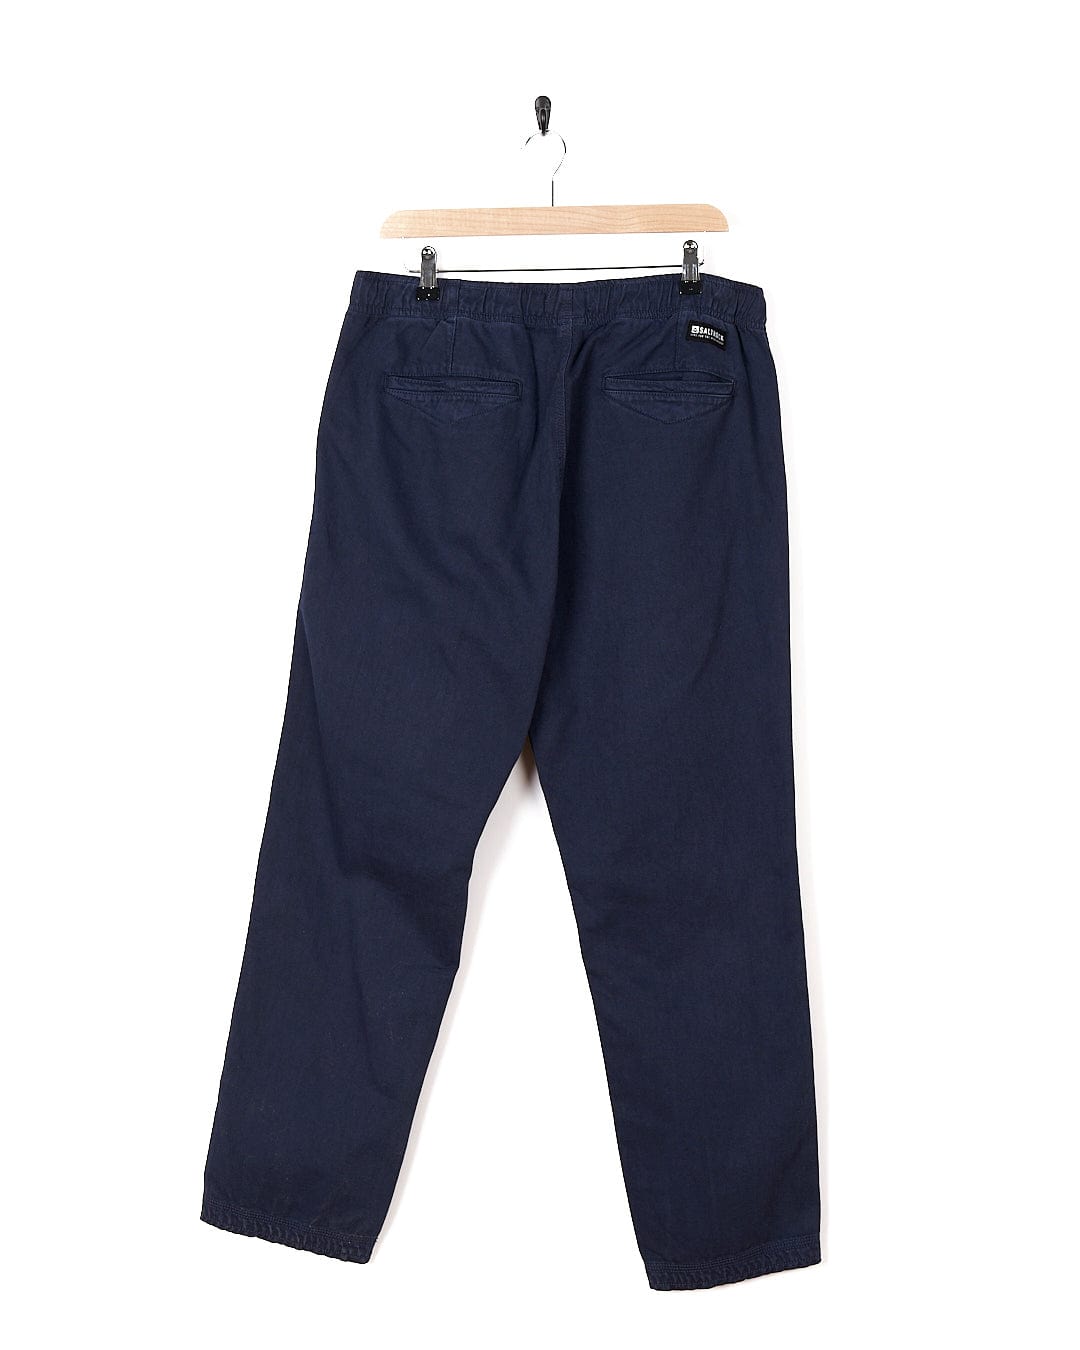 A pair of Saltrock Meddon Mens Twill Trouser in navy color hanging on a hanger.